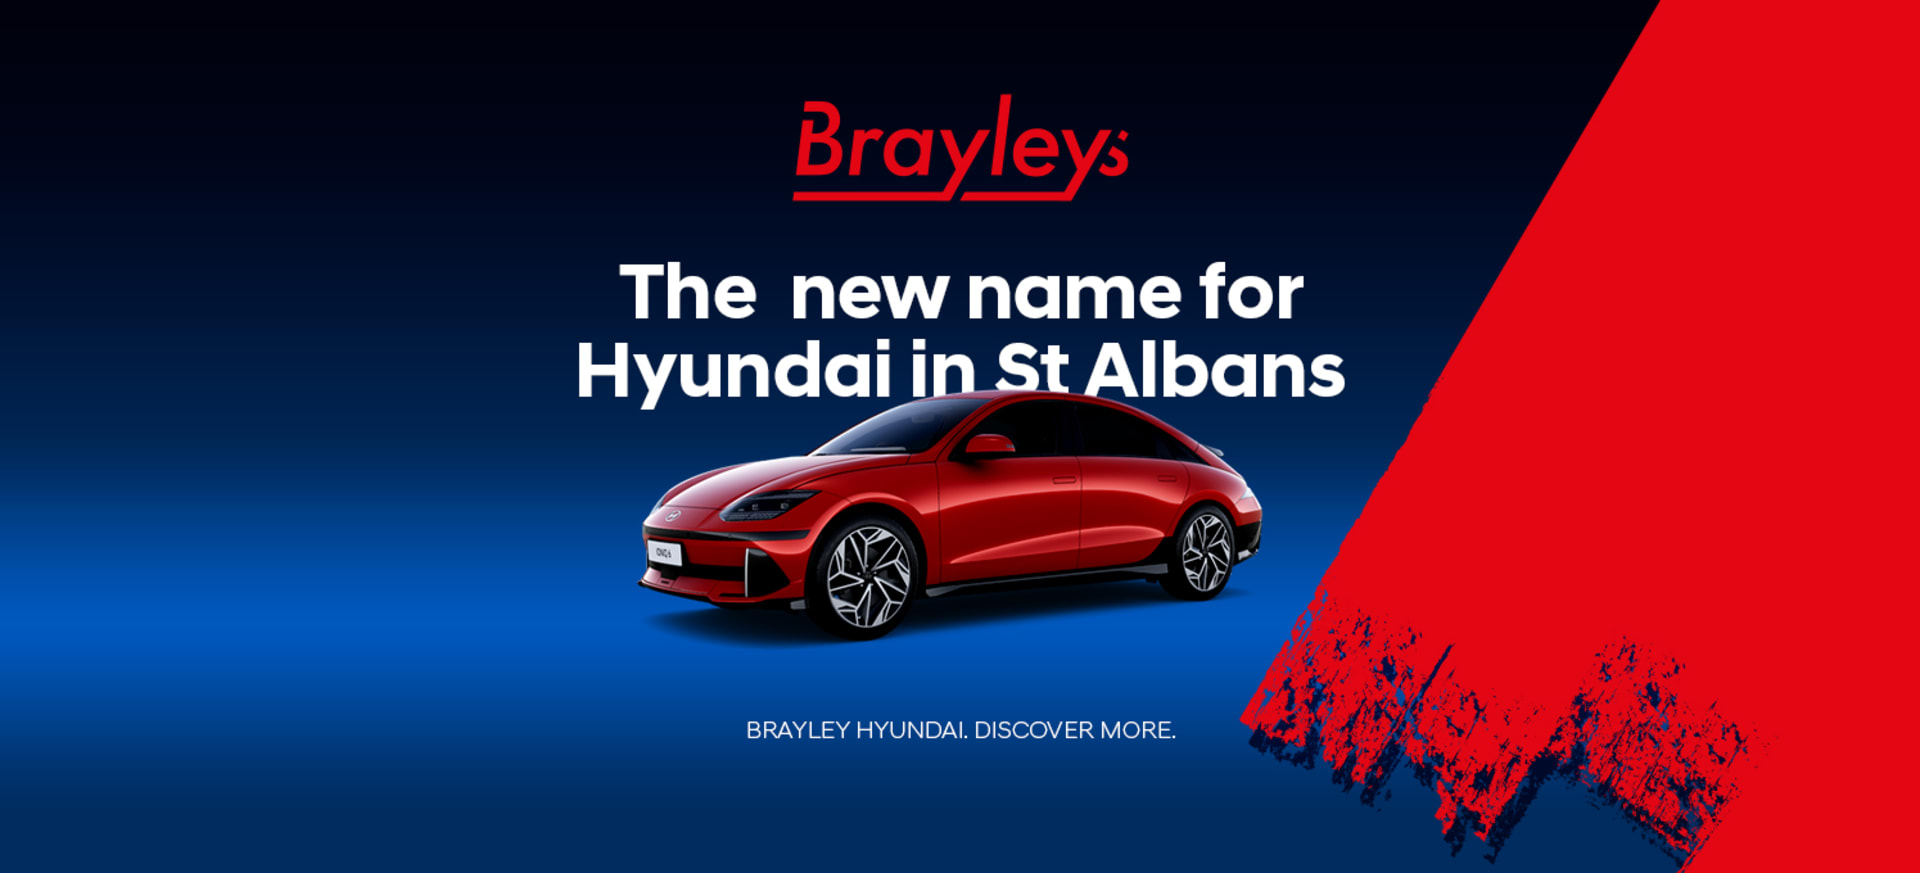 Brayleys, the new name for Hyundai in St Albans